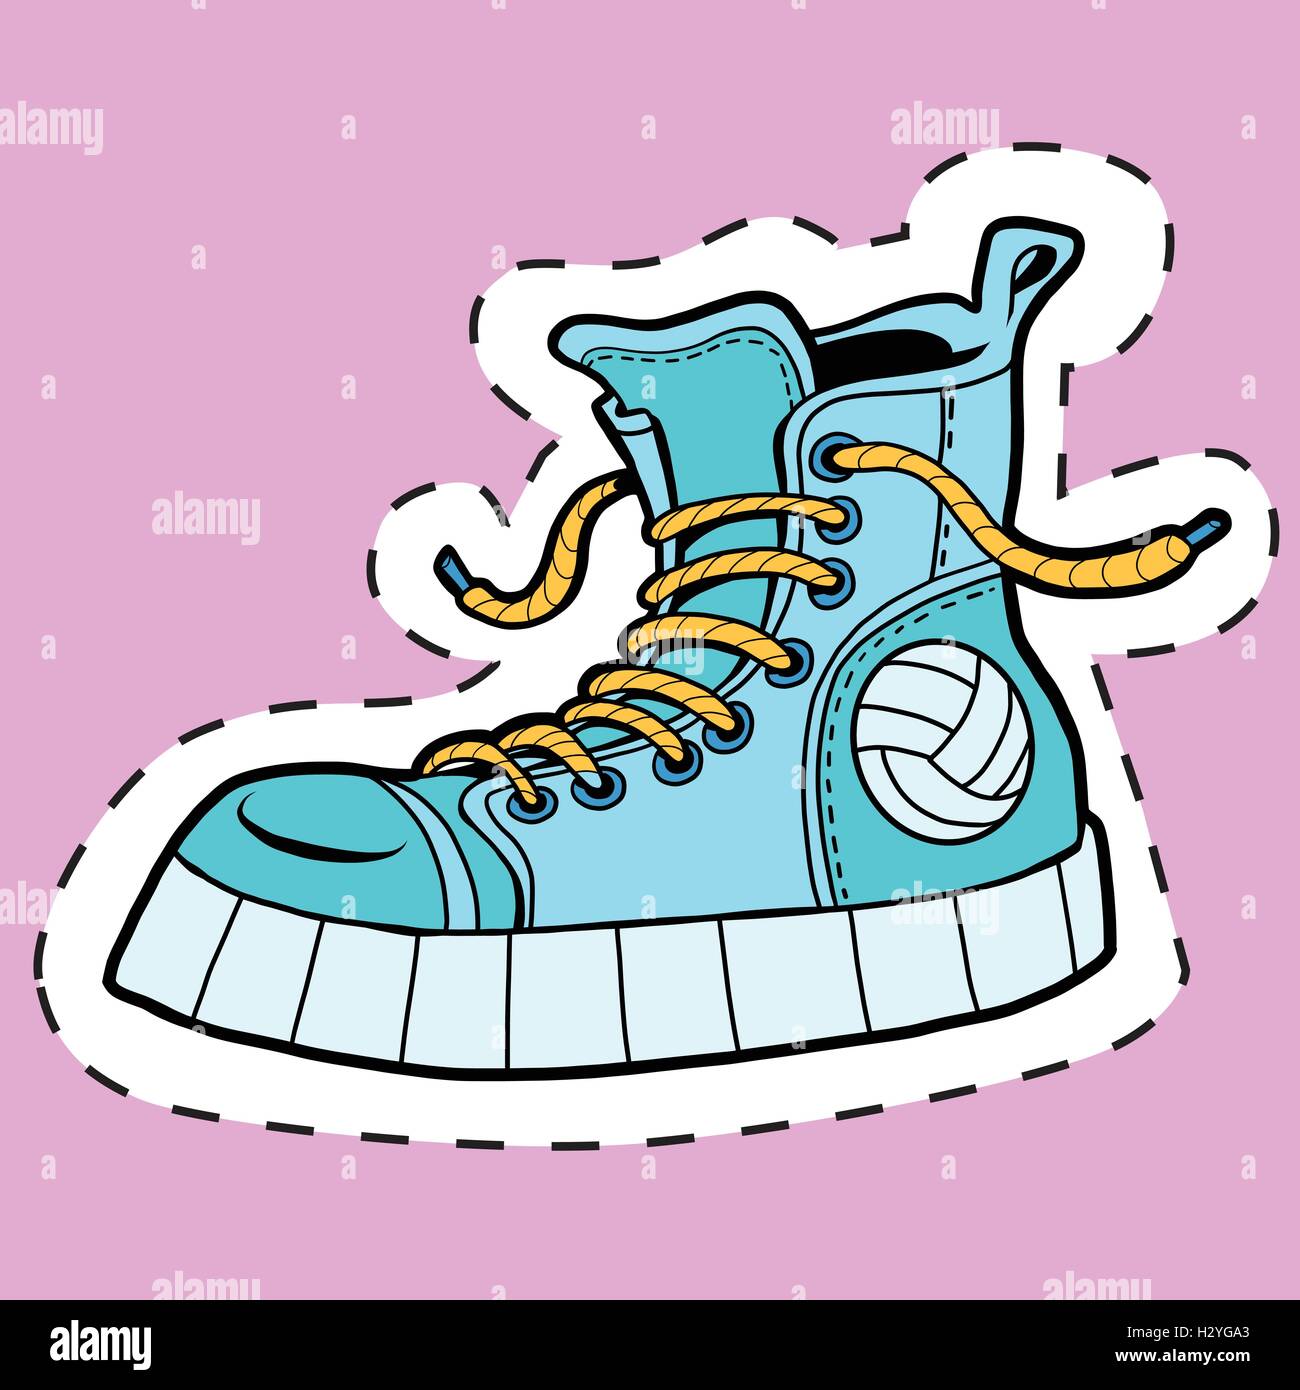 Sticker label sports rubber shoes Stock Vector